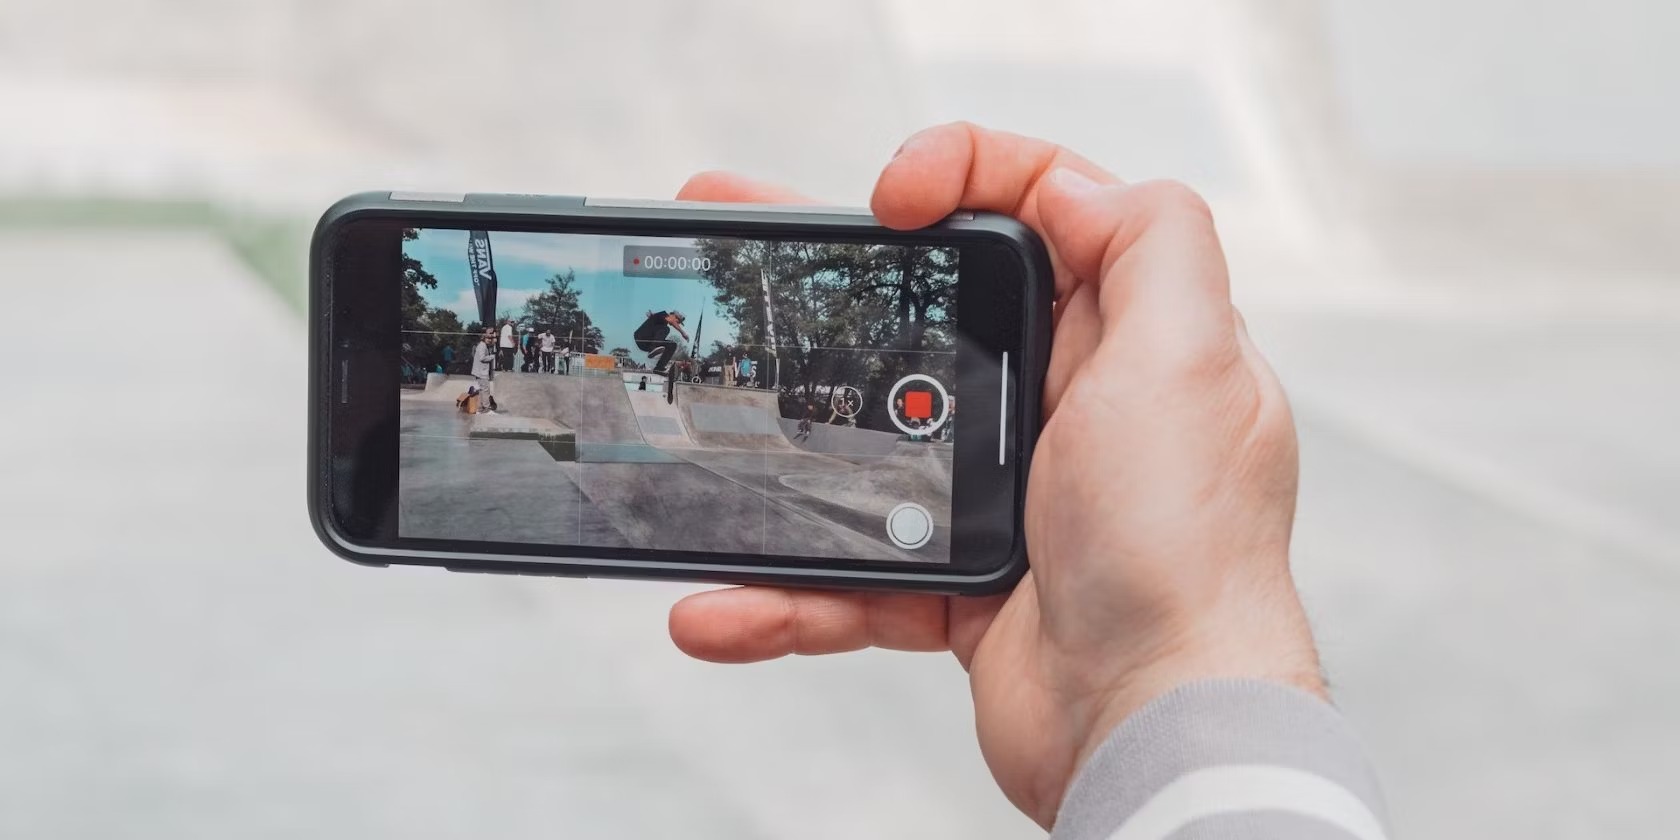 How To Take Photos While Recording Video On An IPhone